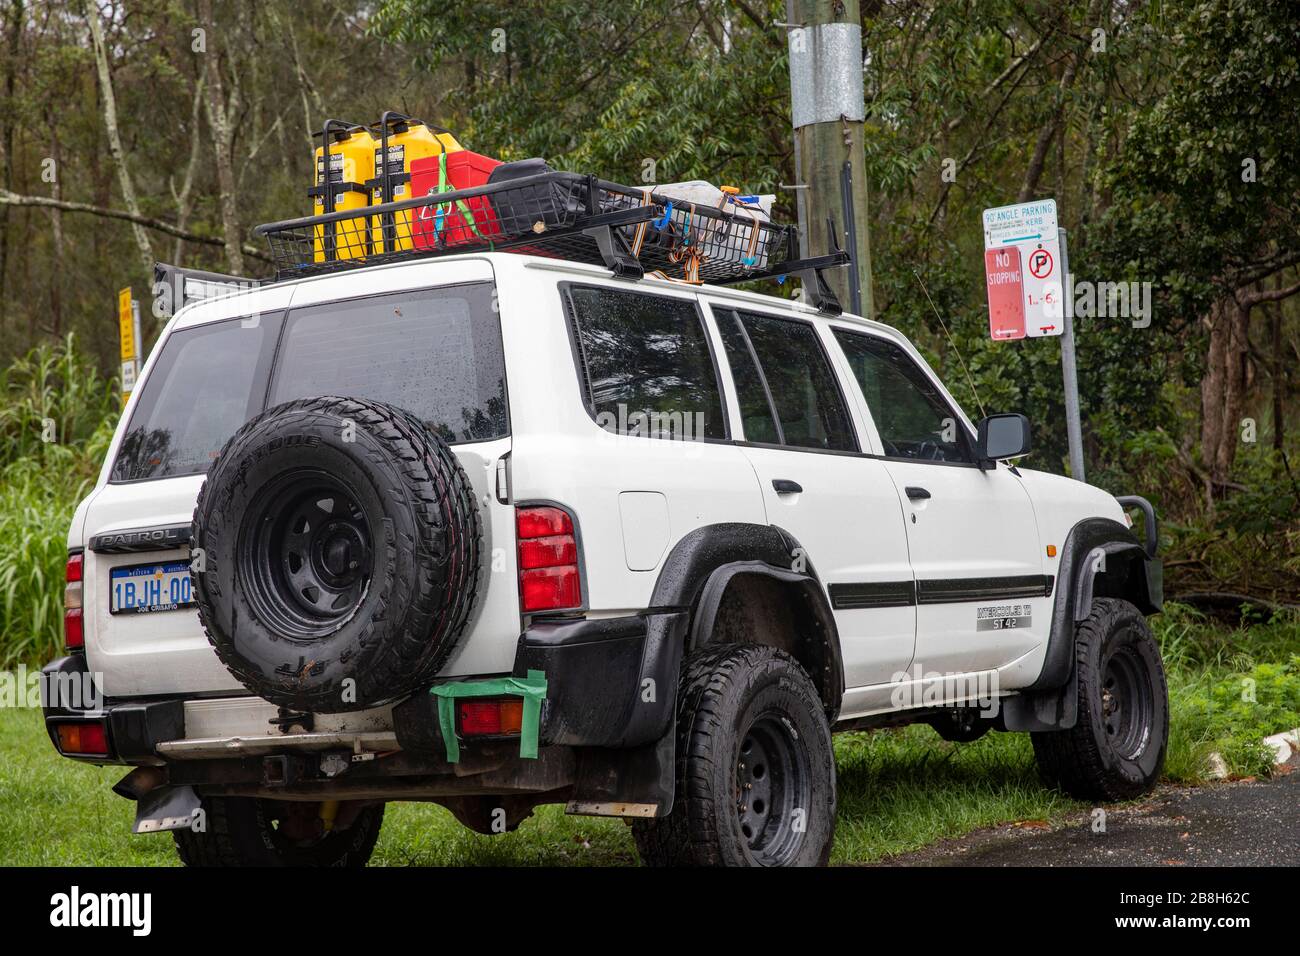 Nissan Patrol off road vehicle carrying supplies and spare fuel, Australia Stock Photo